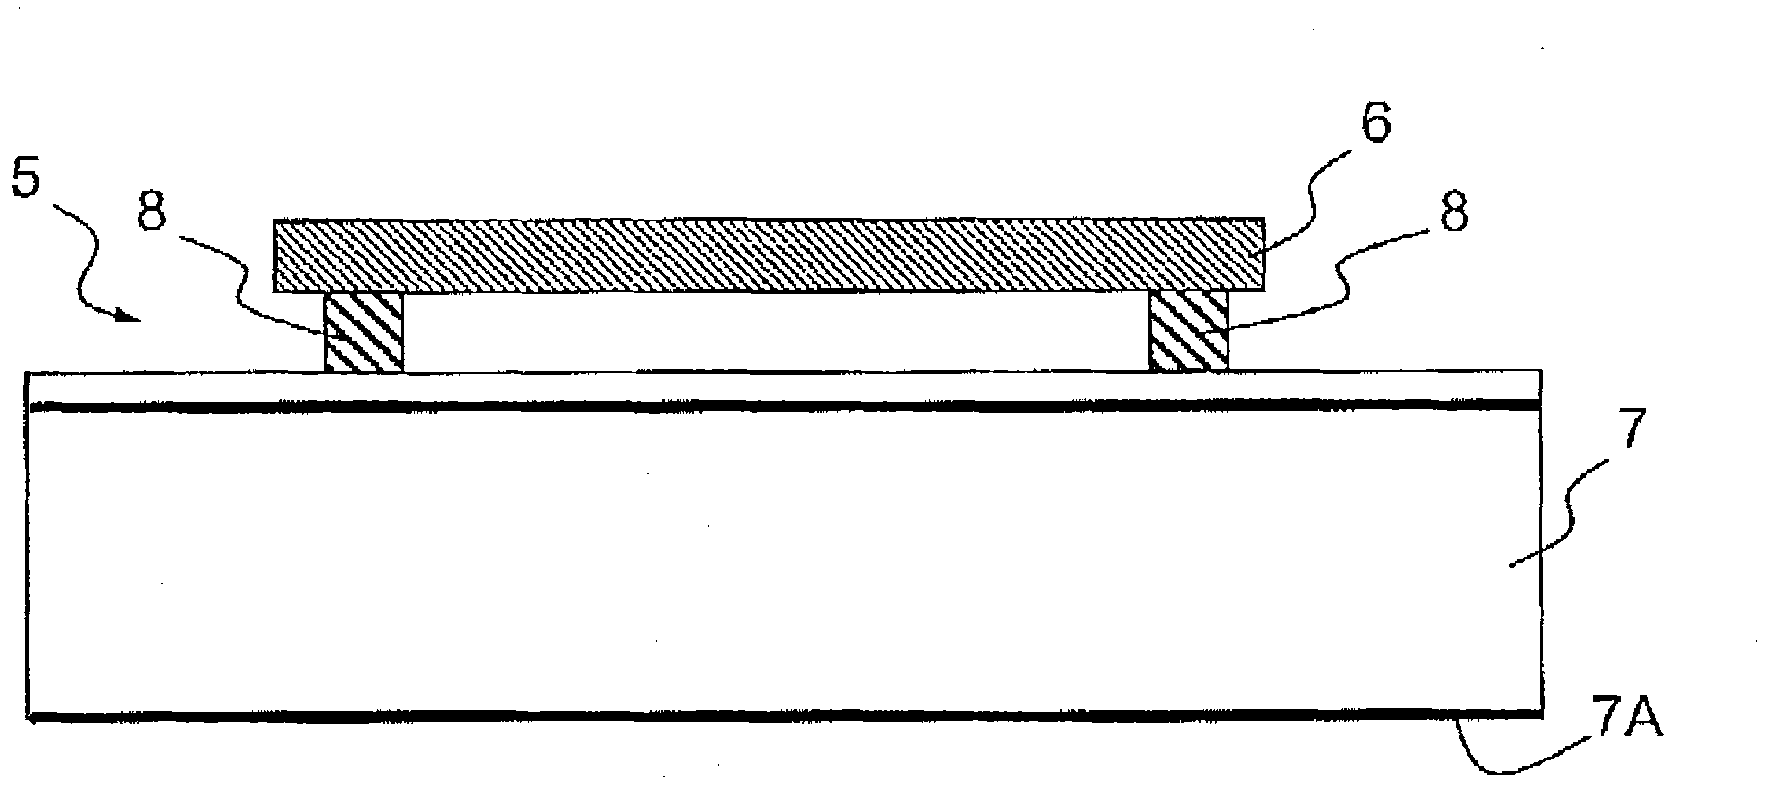 Photovoltaic cell array with mechanical uncoupling of the cells from the carrier thereof